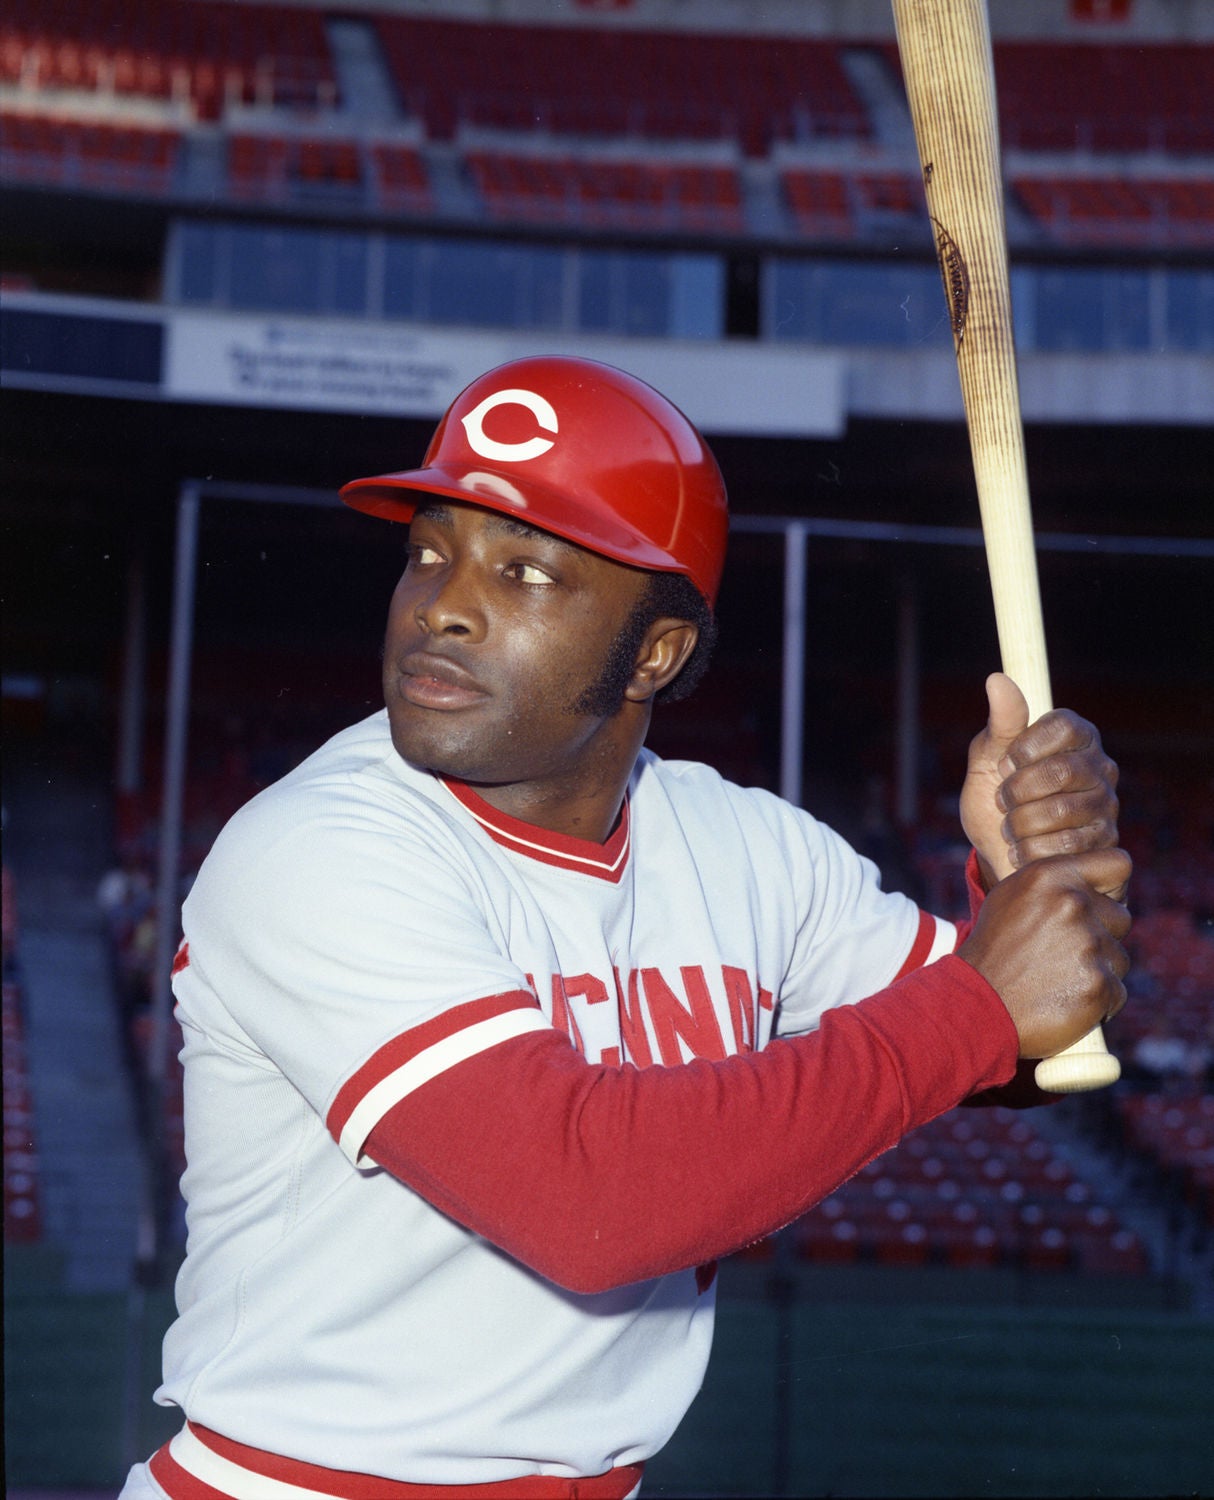 Joe Morgan remembered as winner on and off the field | Baseball Hall of Fame